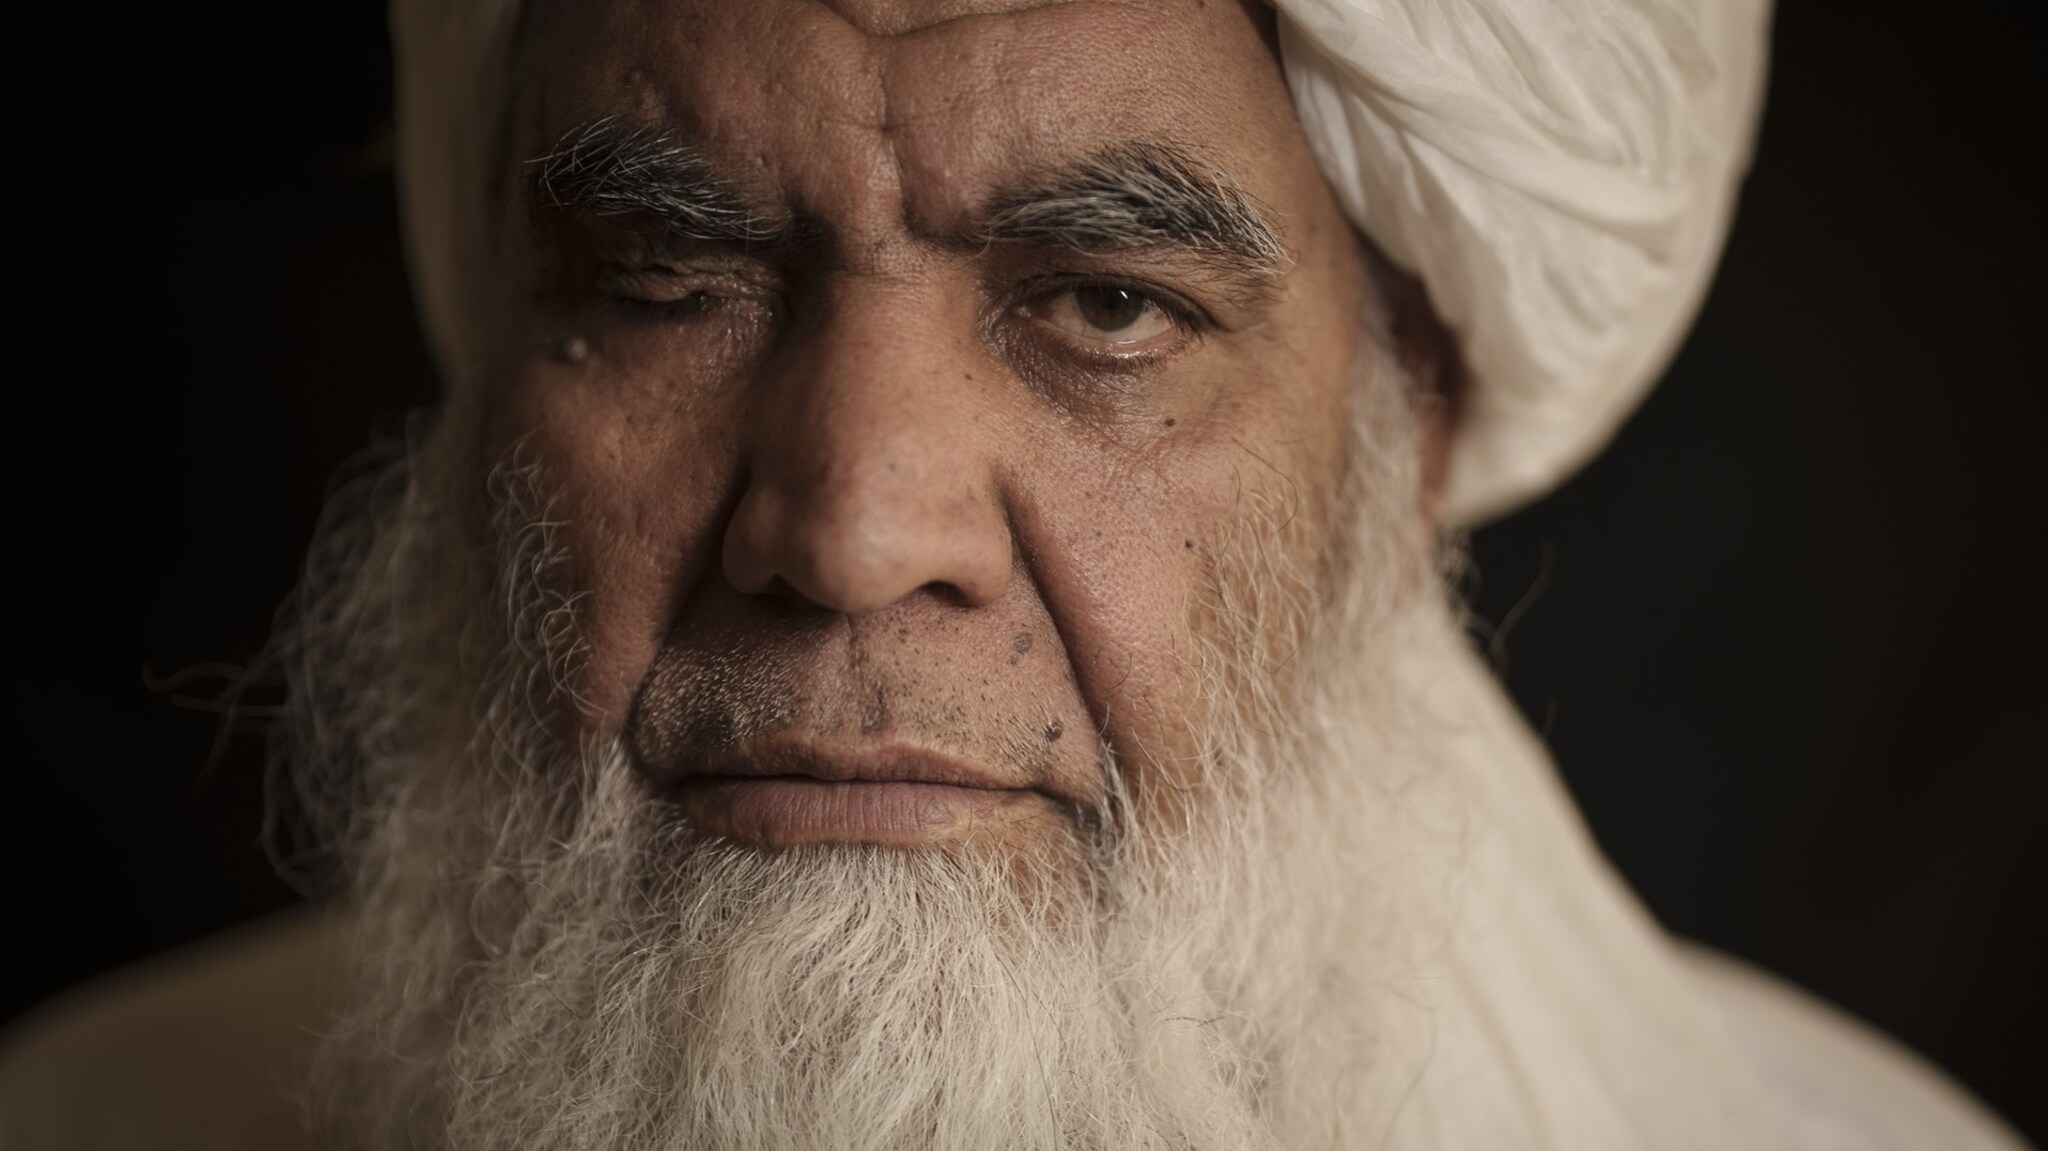 Taliban leader: 'corporal punishment and executions will return in Afghanistan'